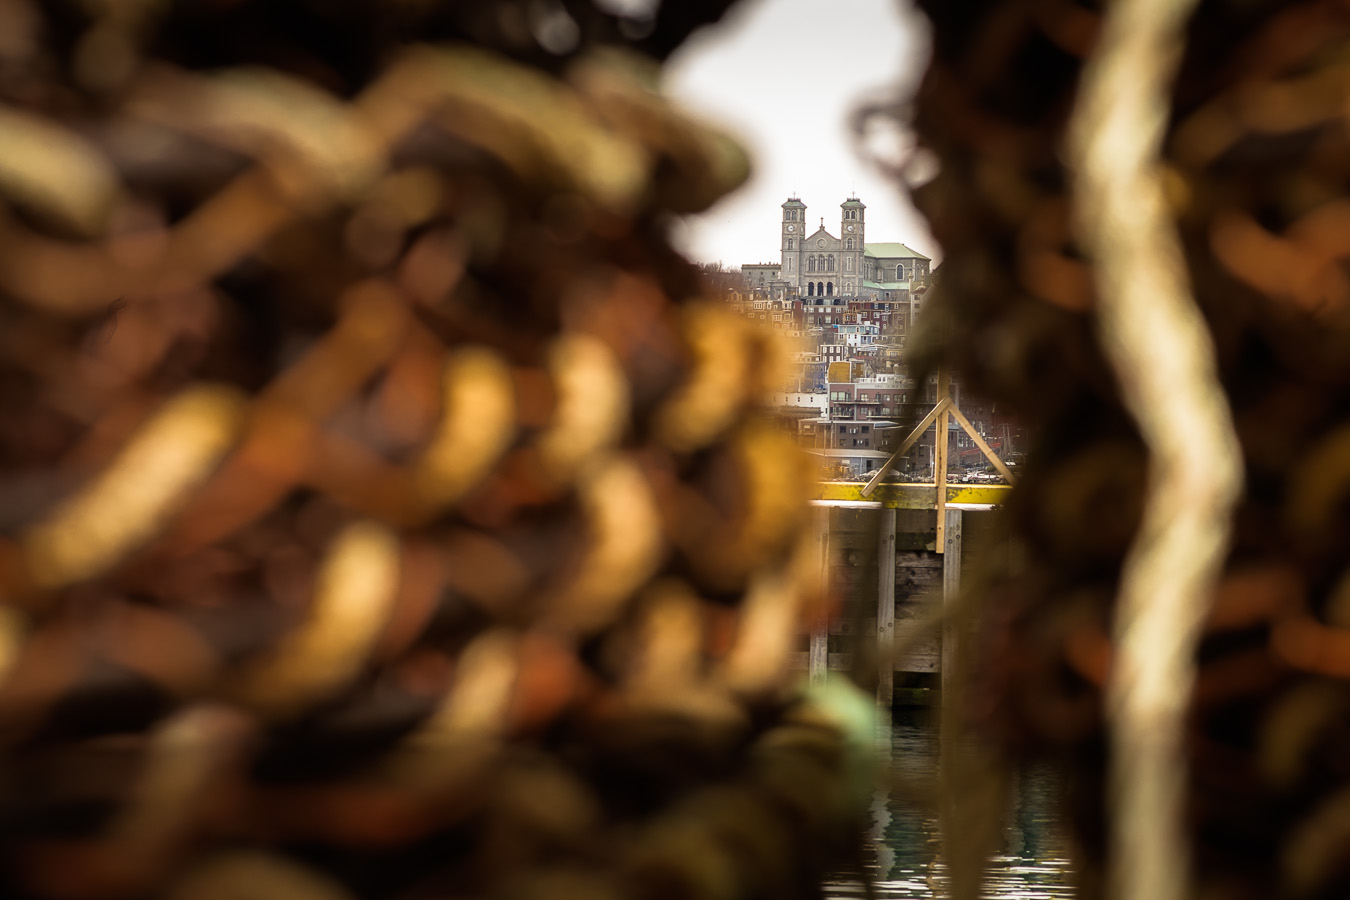 A View of the St. John's Basillica through a set of lobster pots - Southside Road